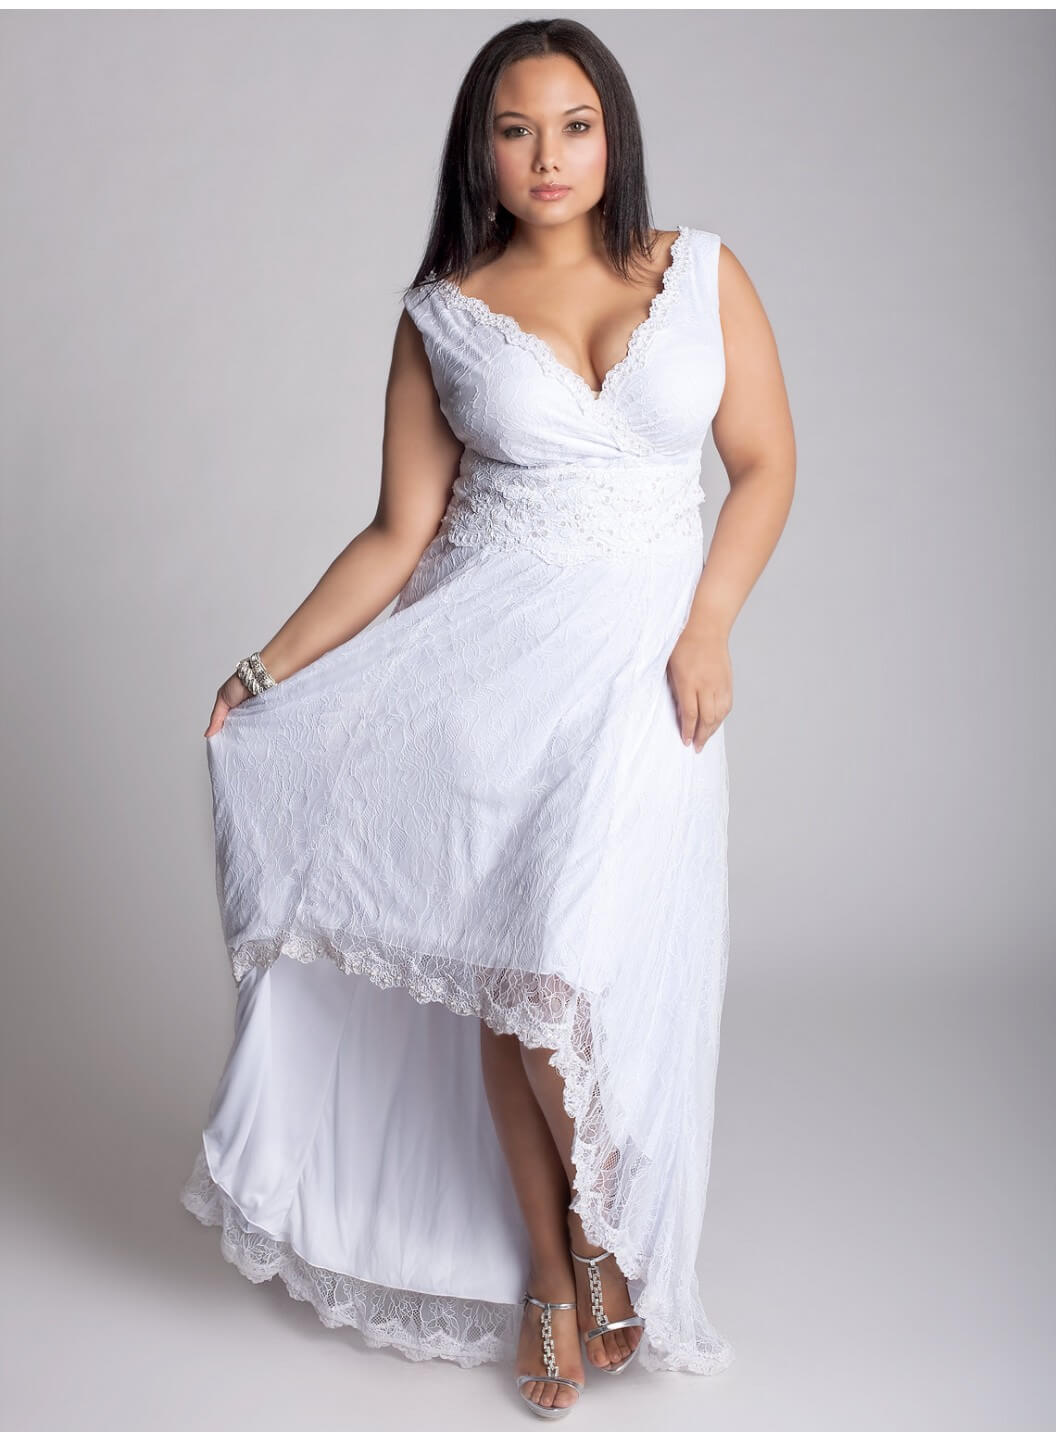 Perfect Plus Size Wedding Dresses For Women